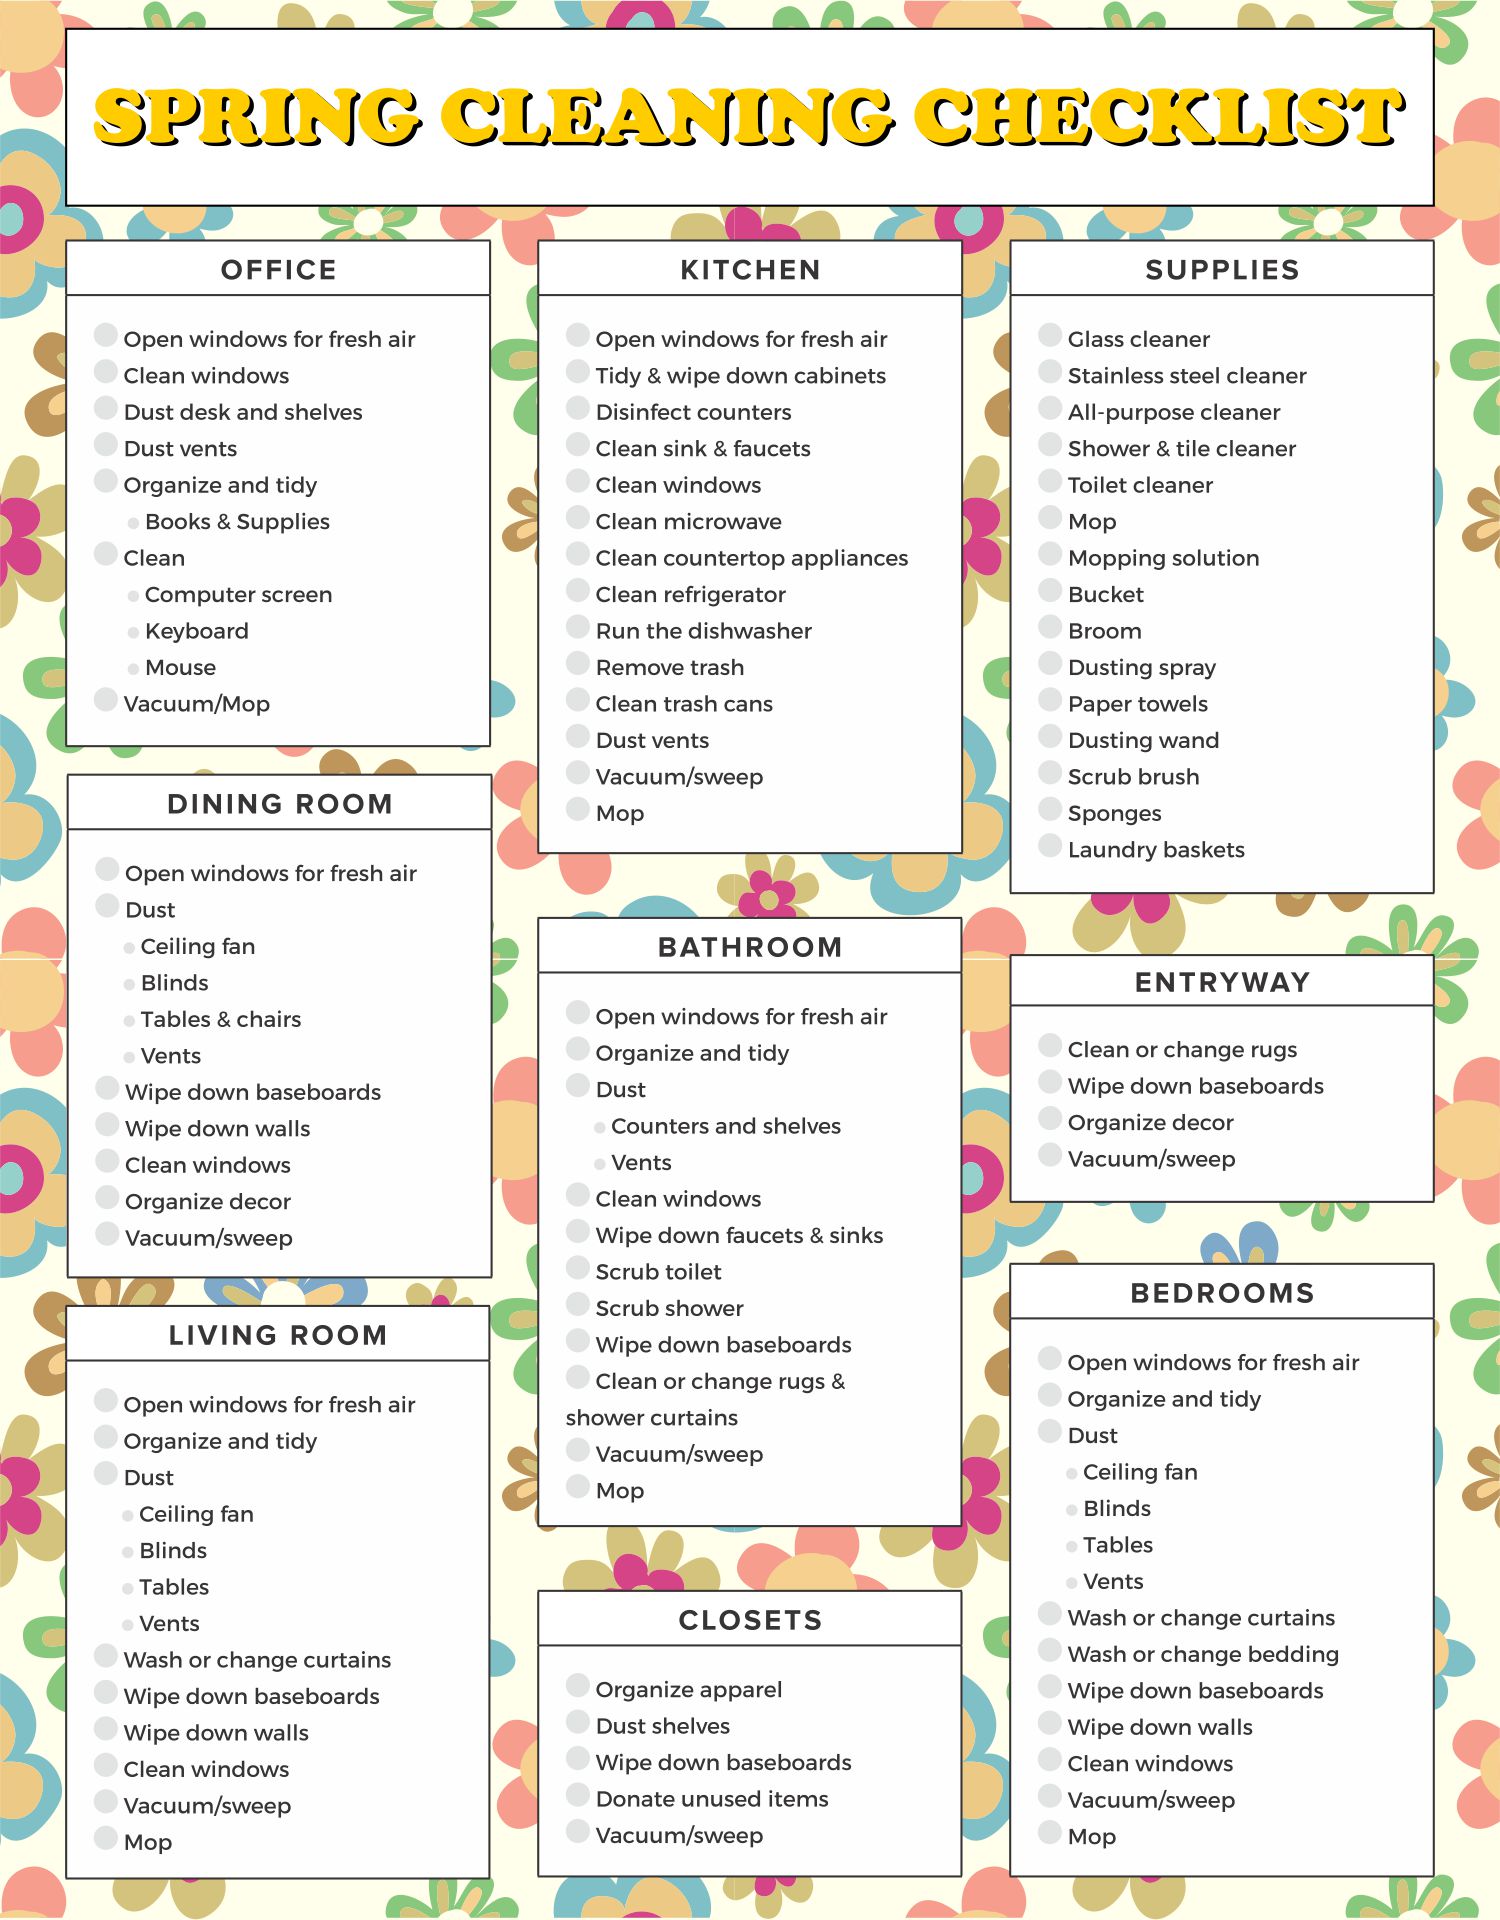 Restaurant Kitchen Cleaning Checklist Template from www.printablee.com